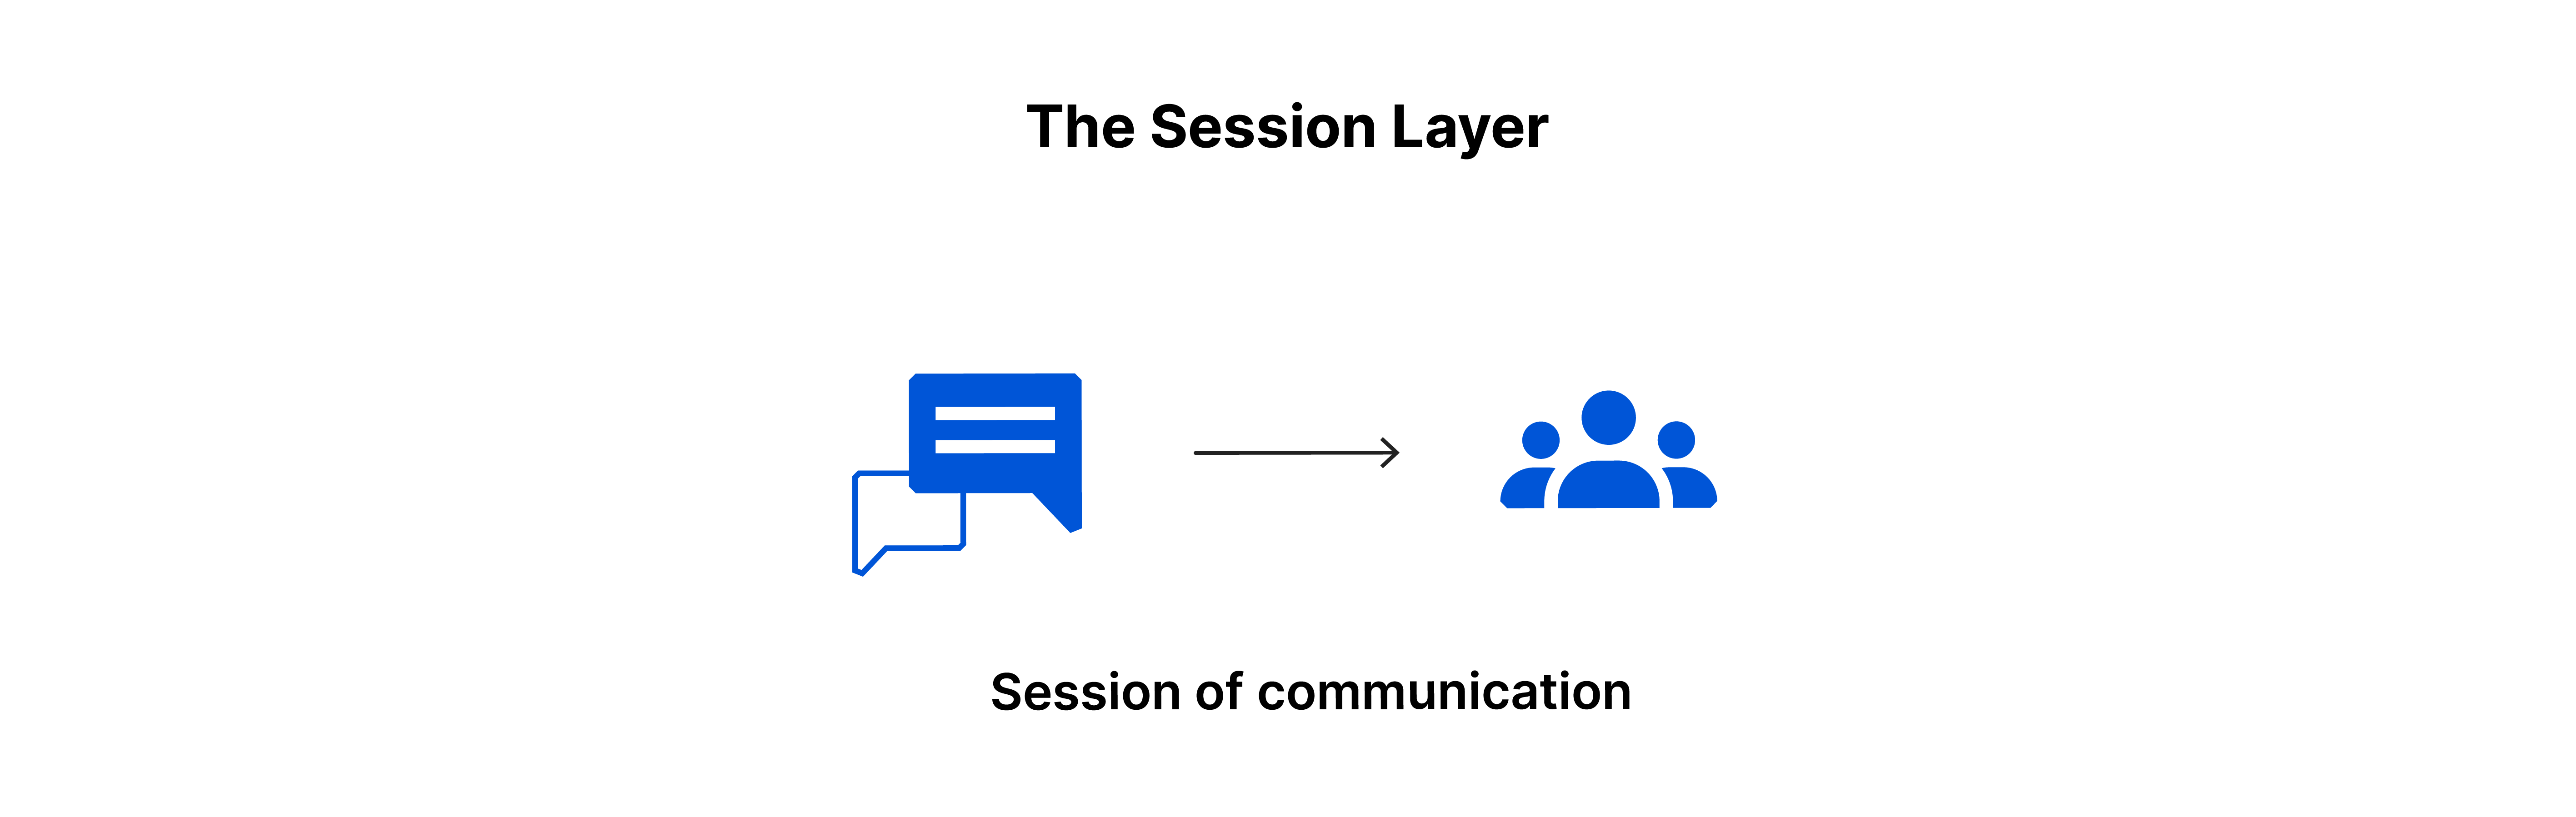 The Session Layer: session of communication